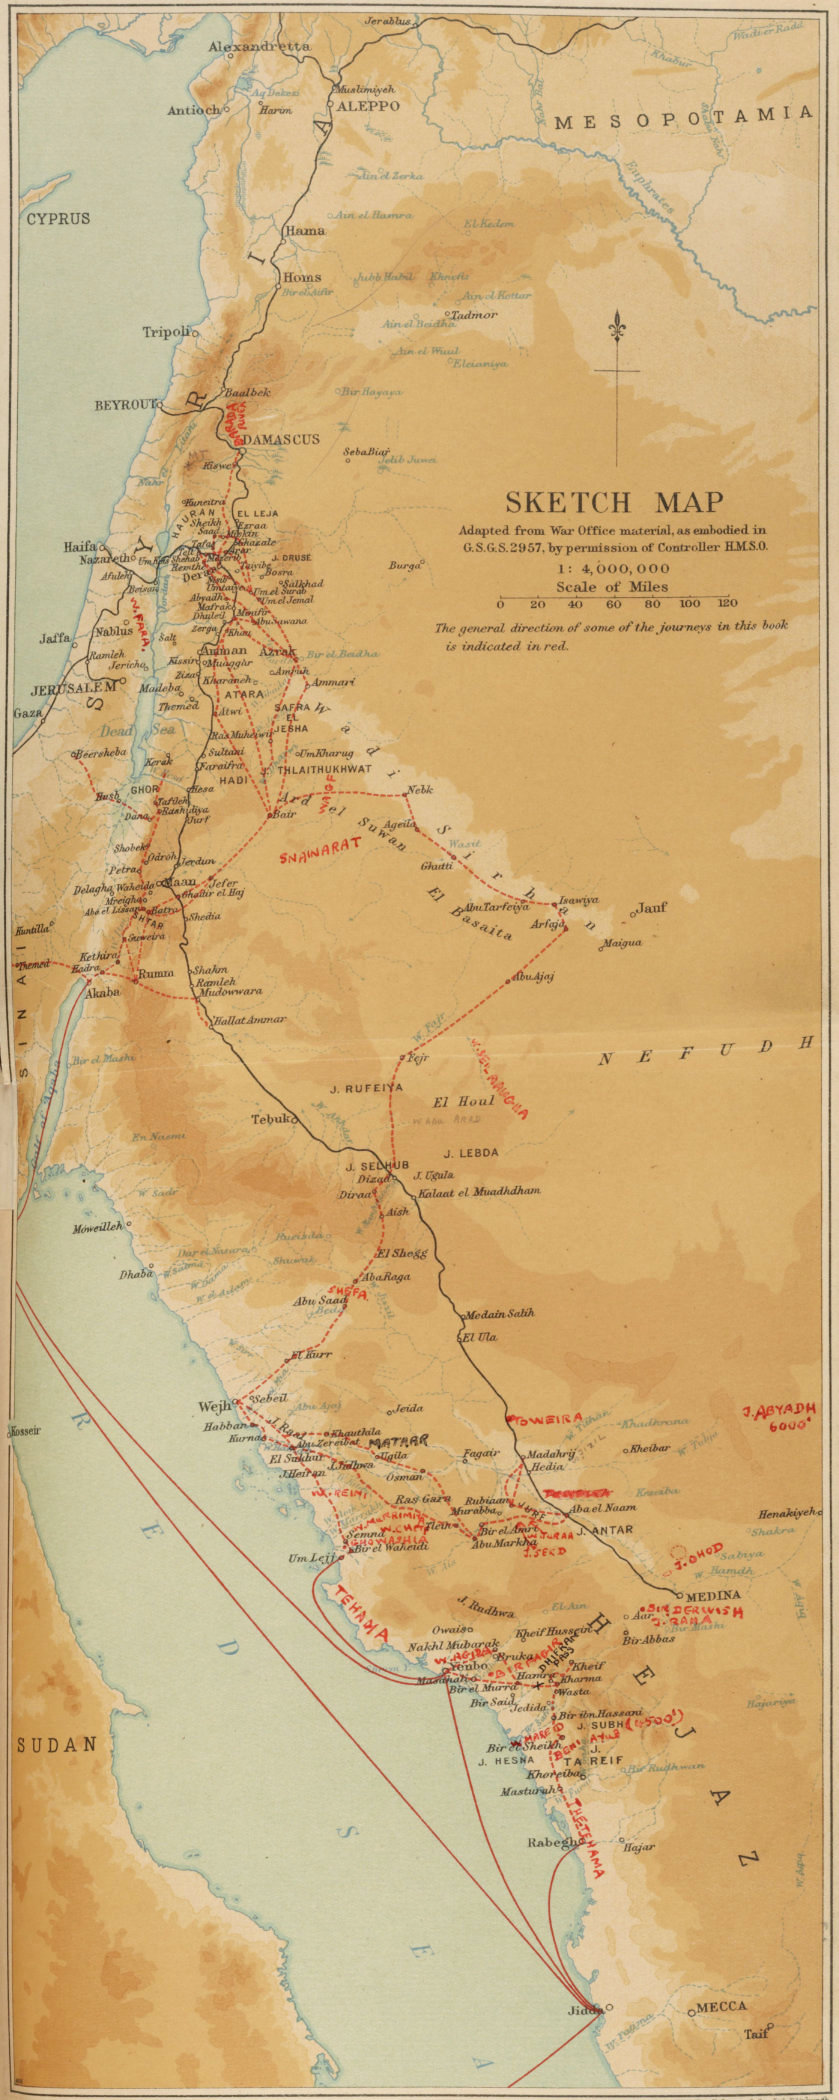 Period map of the area around the Red Sea and up through the Levant. It includes the Hejaz region on the west side of the red sea, with markings for Lawrence’s travels through the region.